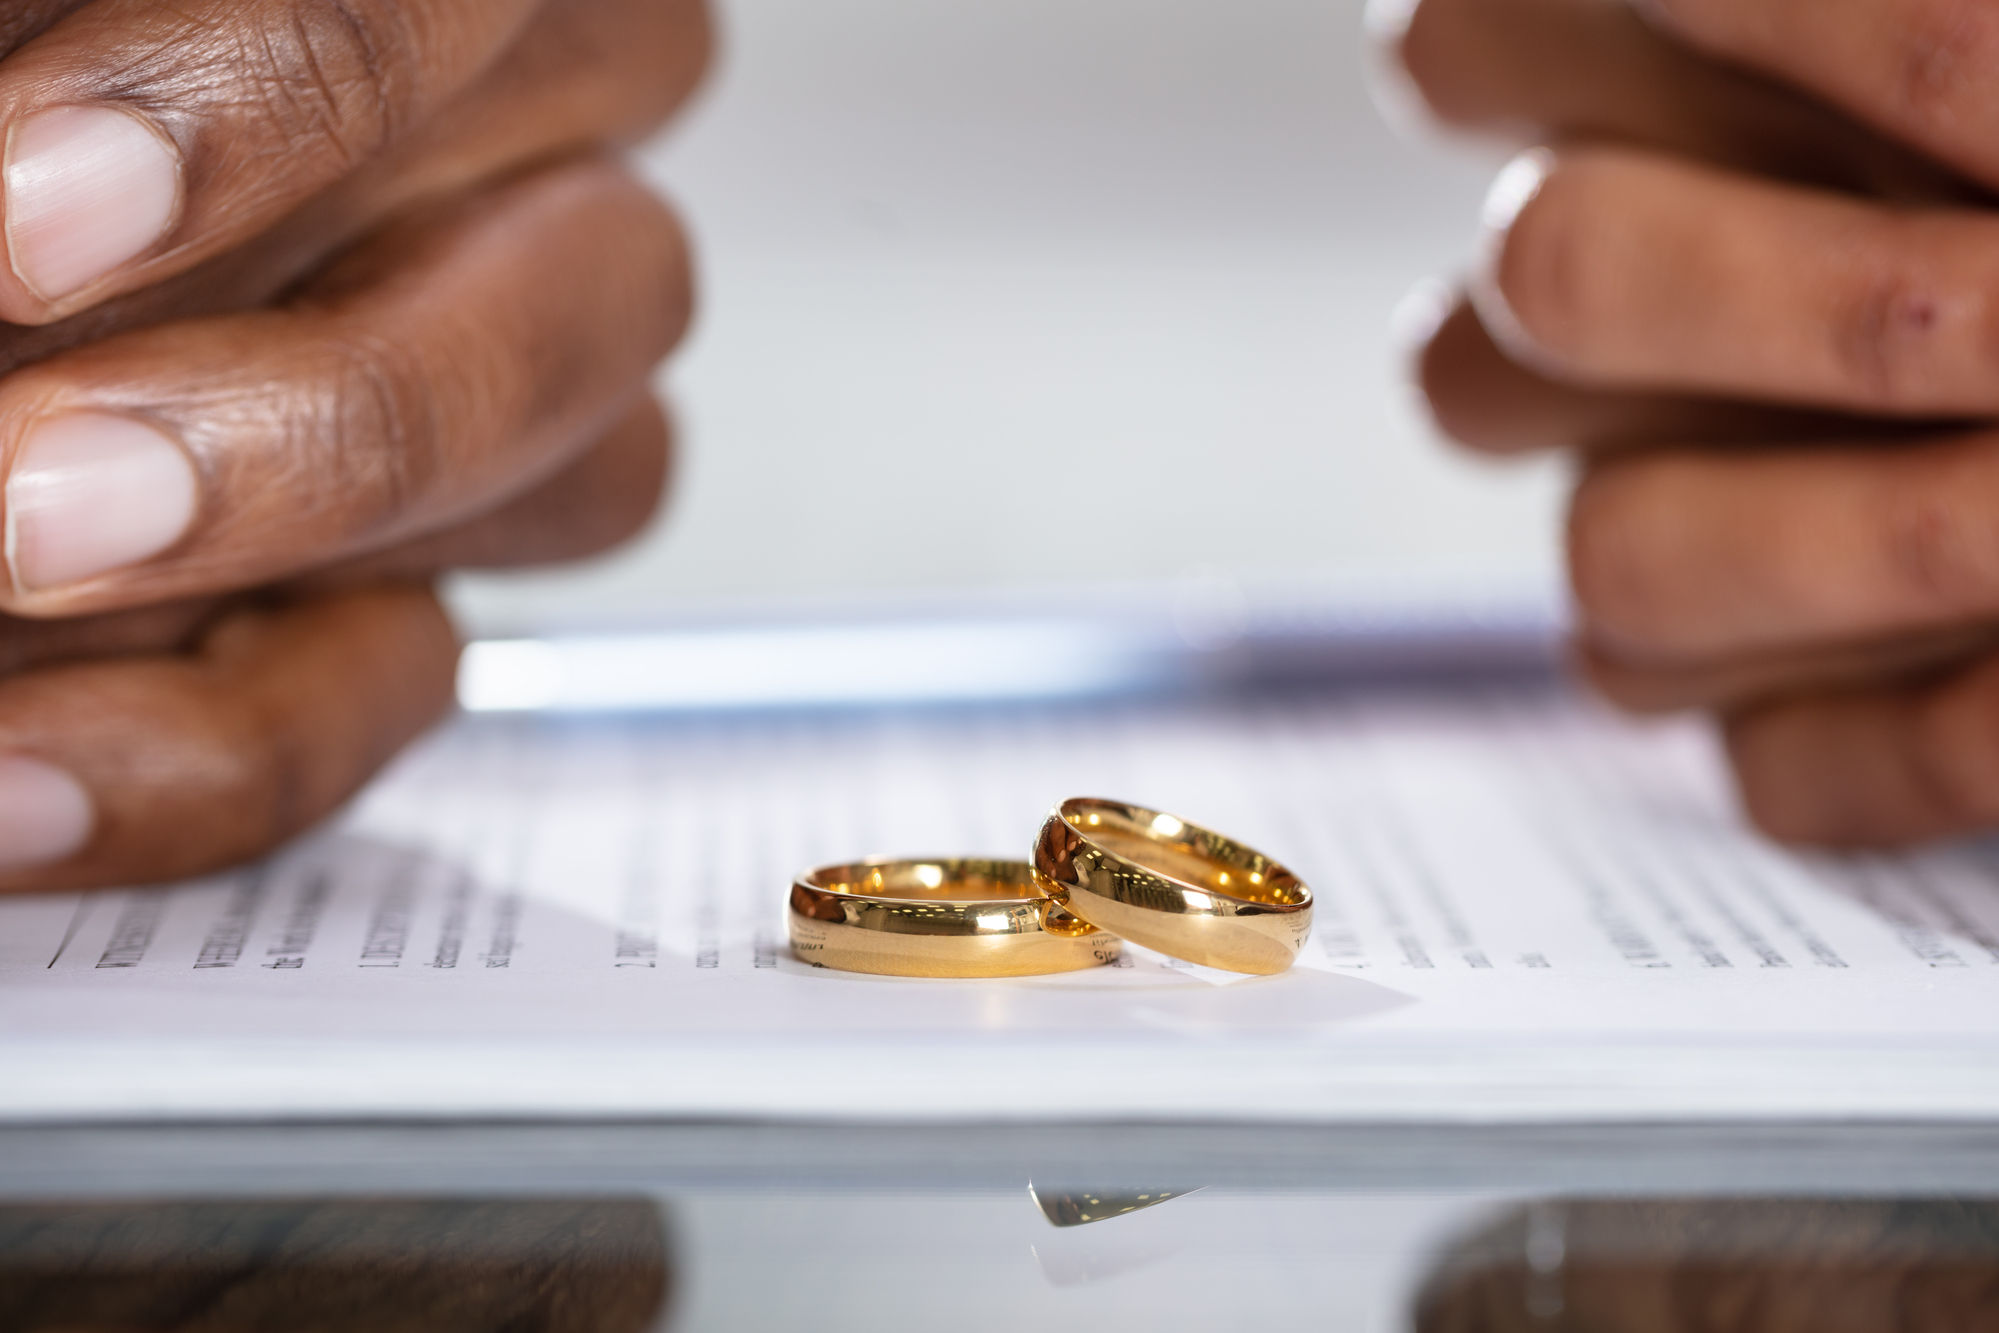 How To Deal With A Difficult Divorce - Couple Hands On Divorce Agreement